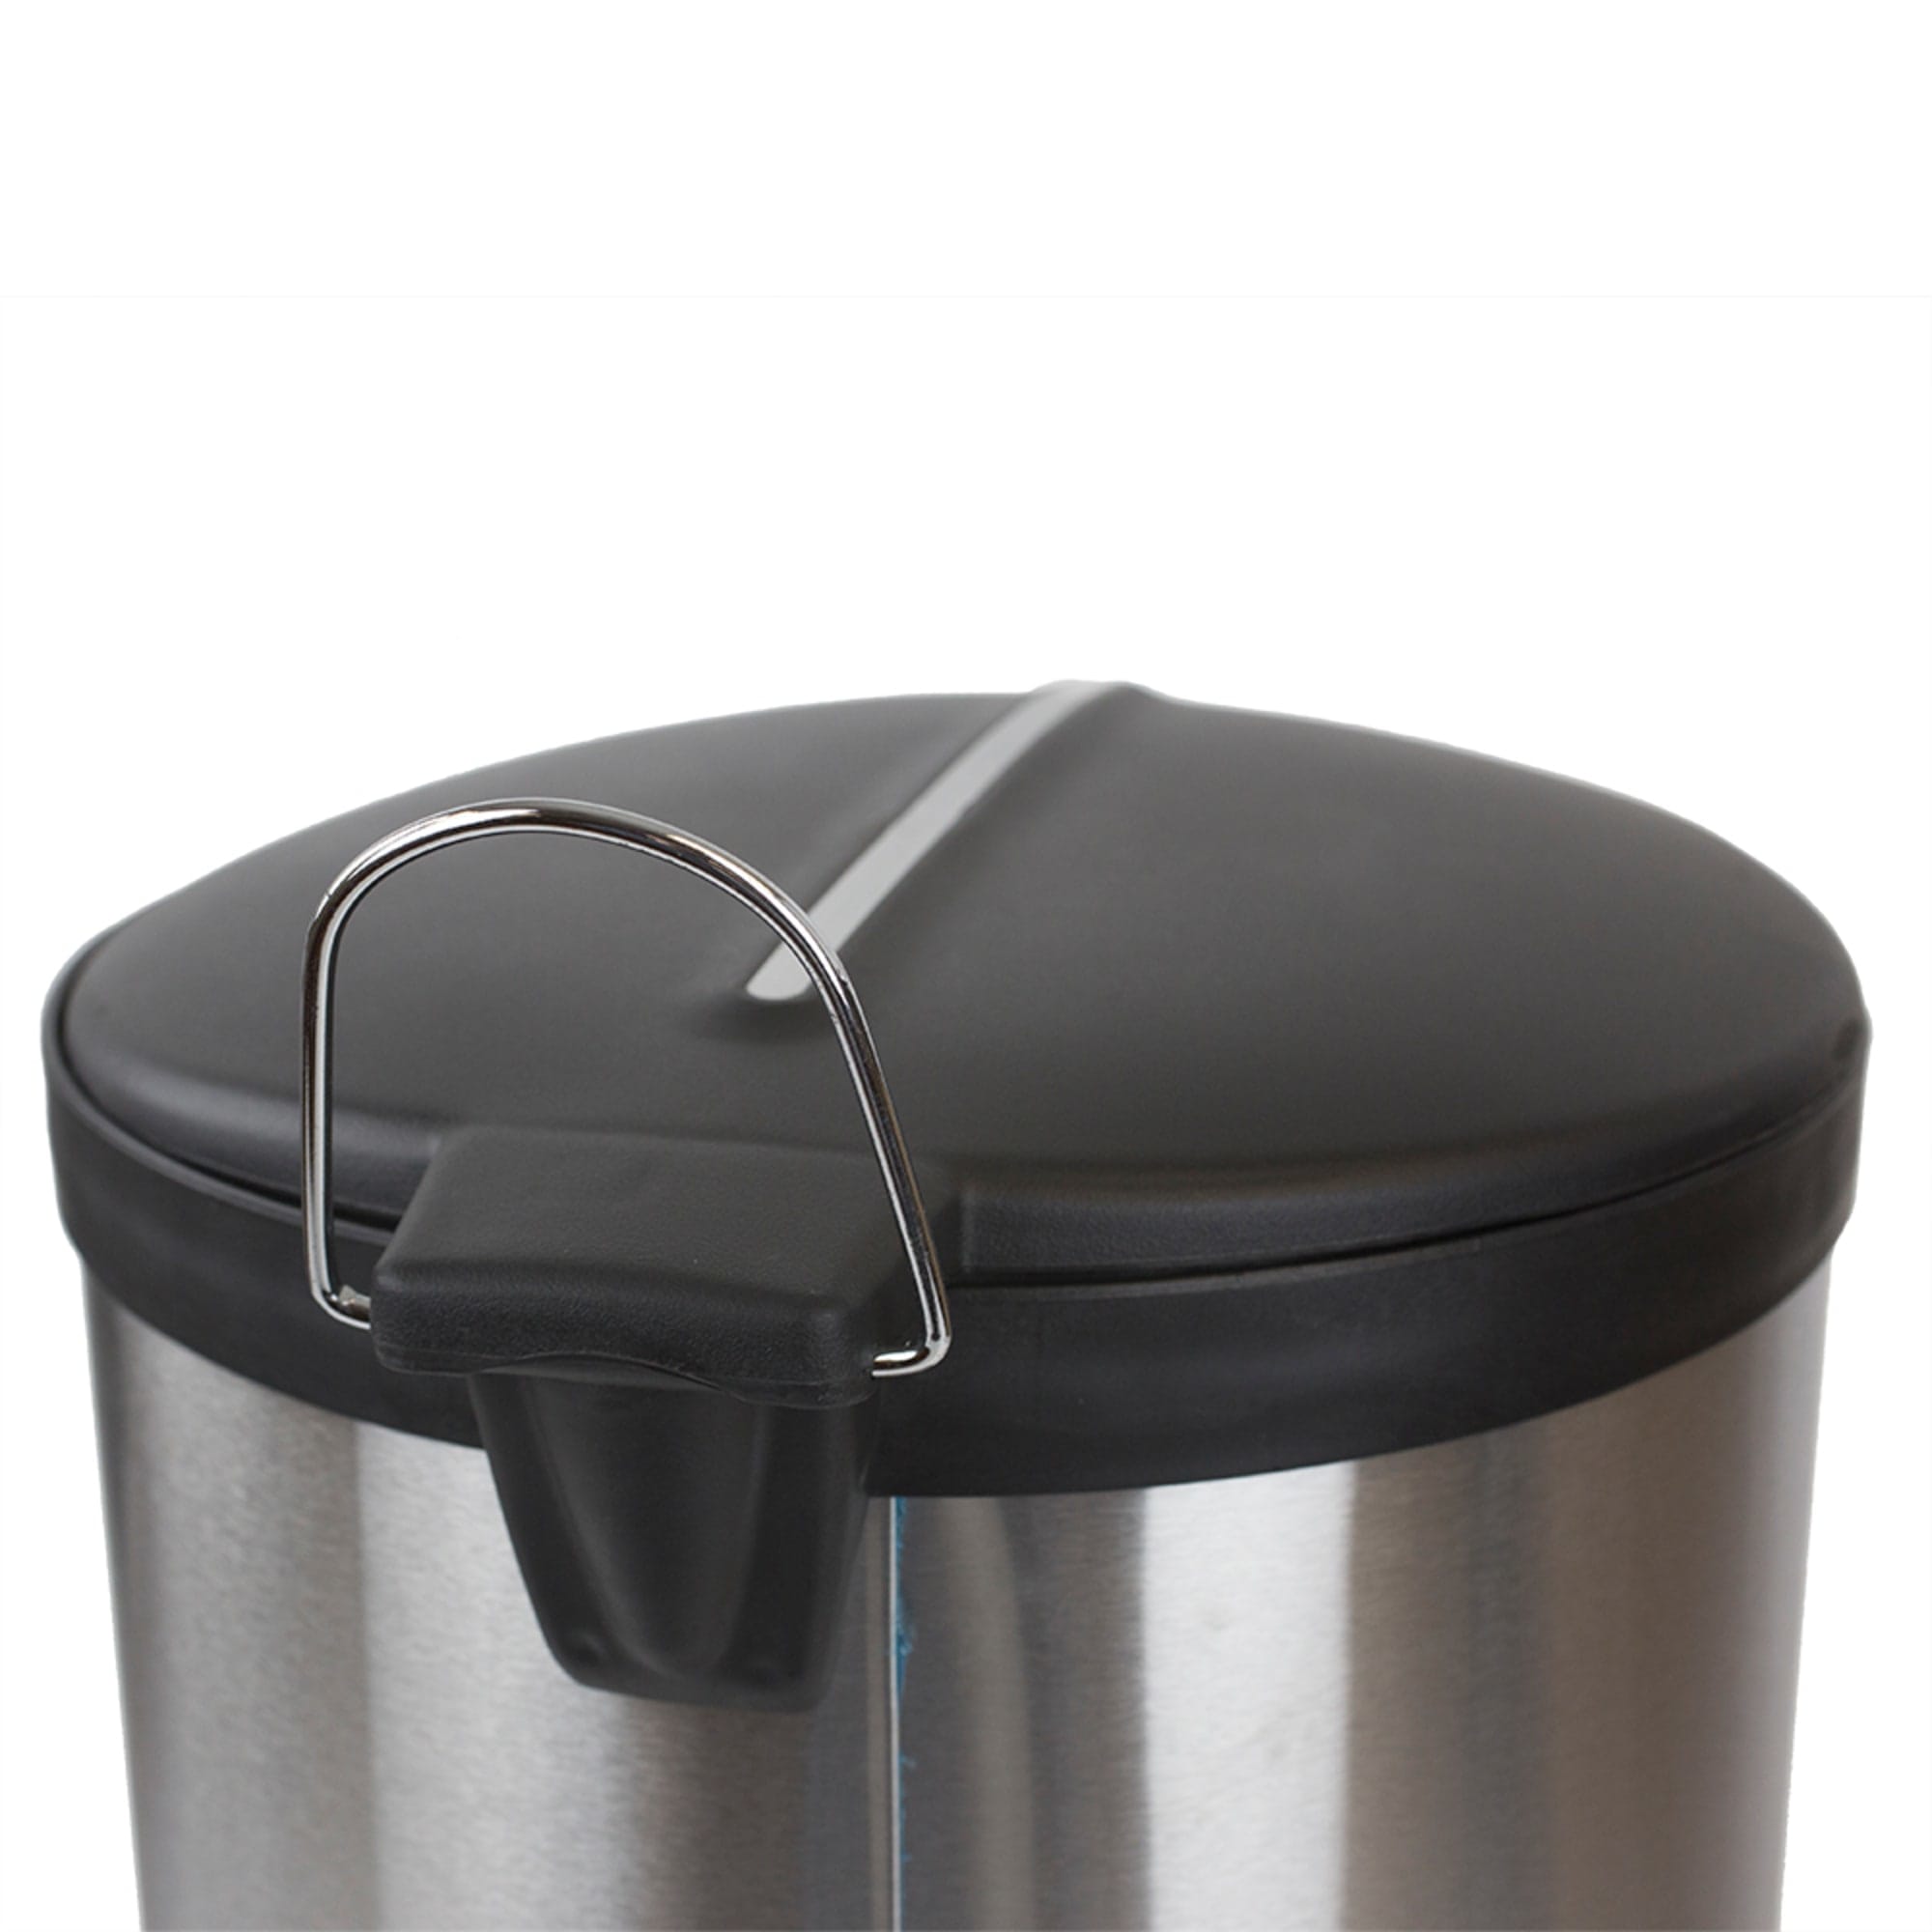 Home Basics 20 Liter Brushed Stainless Steel  with Plastic Top Waste Bin, Silver $30.00 EACH, CASE PACK OF 2